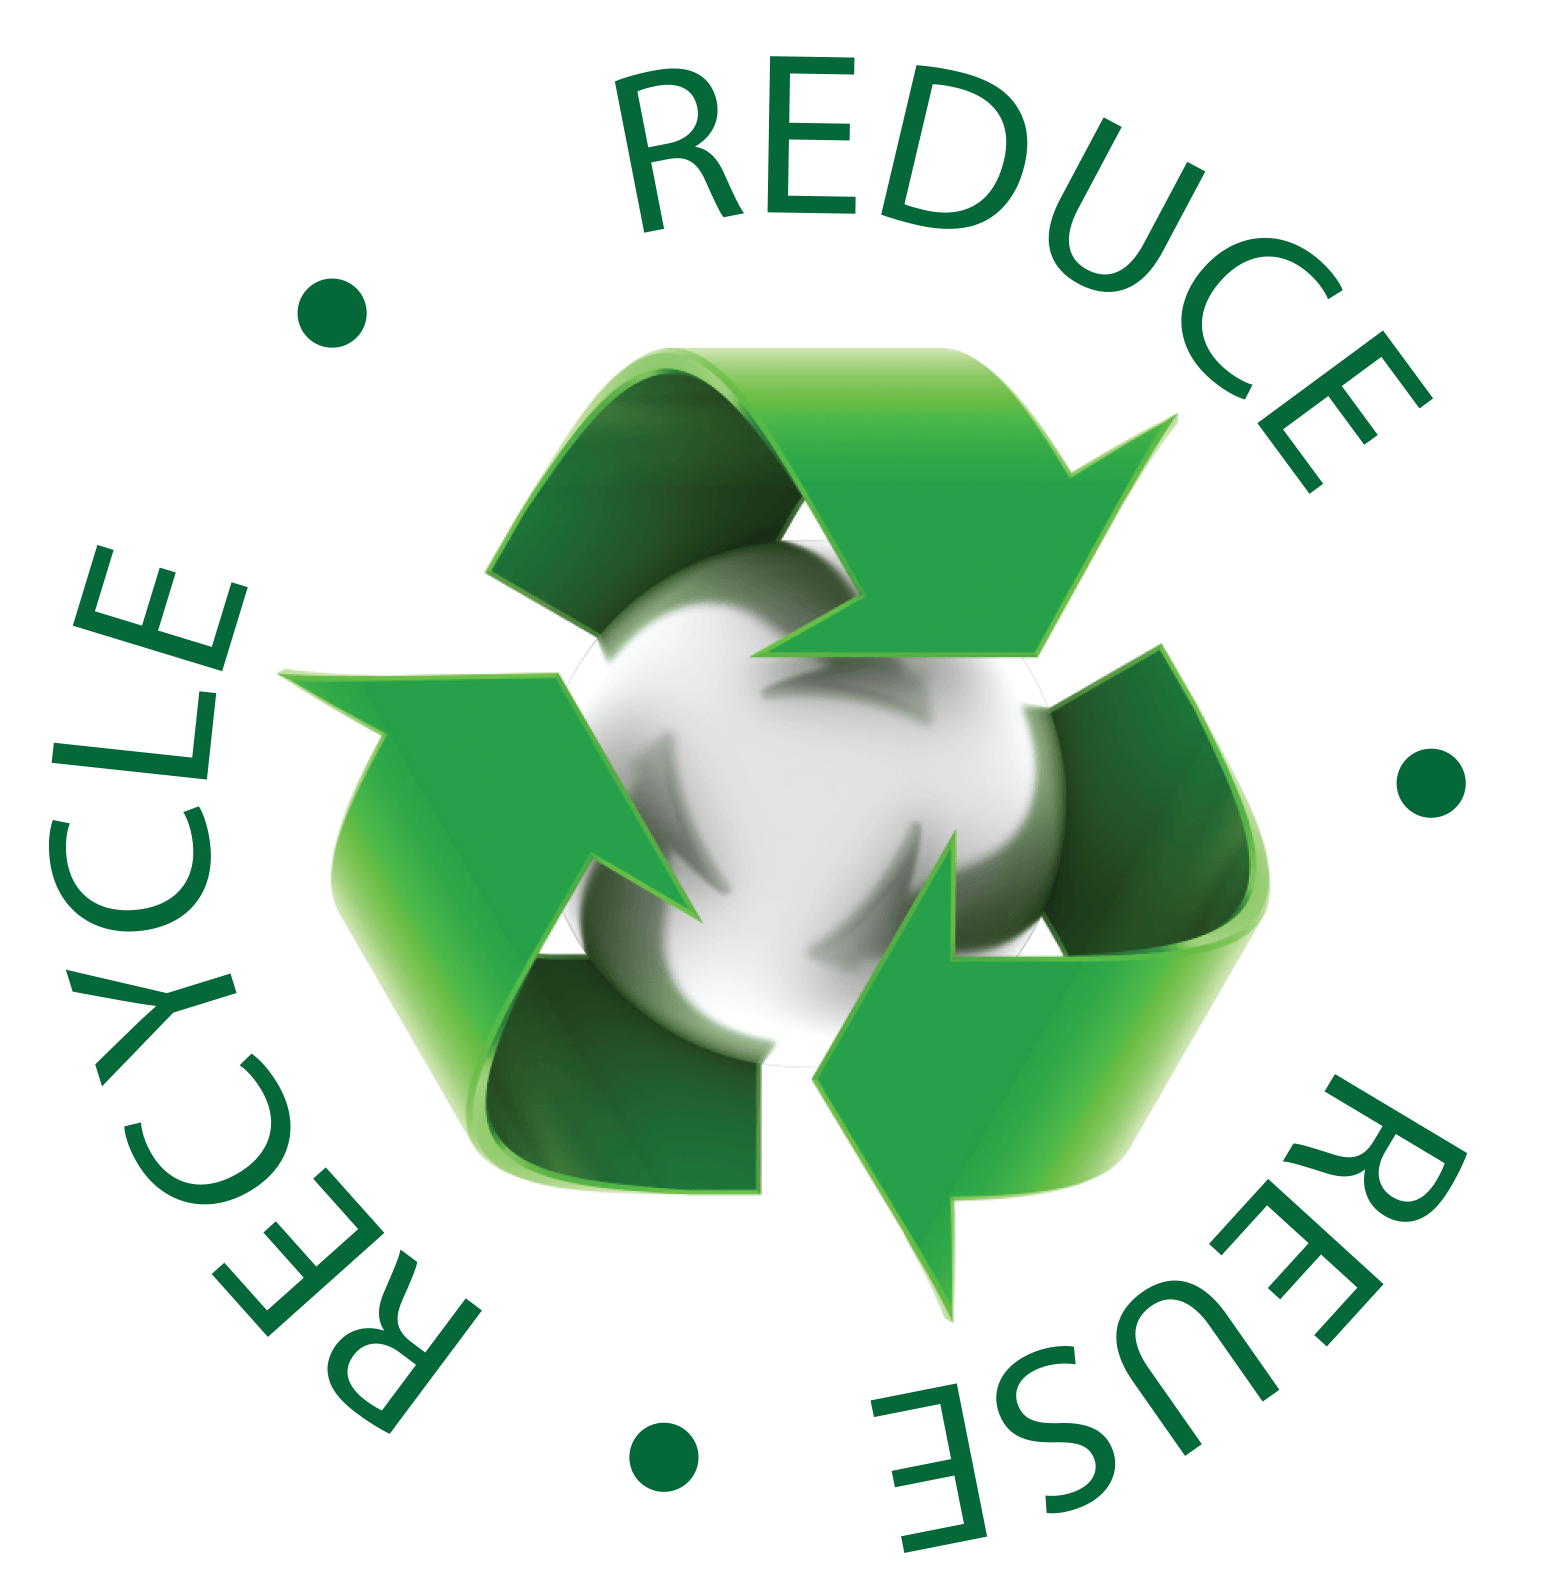 Reuse Logo - Reduce Reuse Recycle Logo | Free All Download | Recycle logo ...